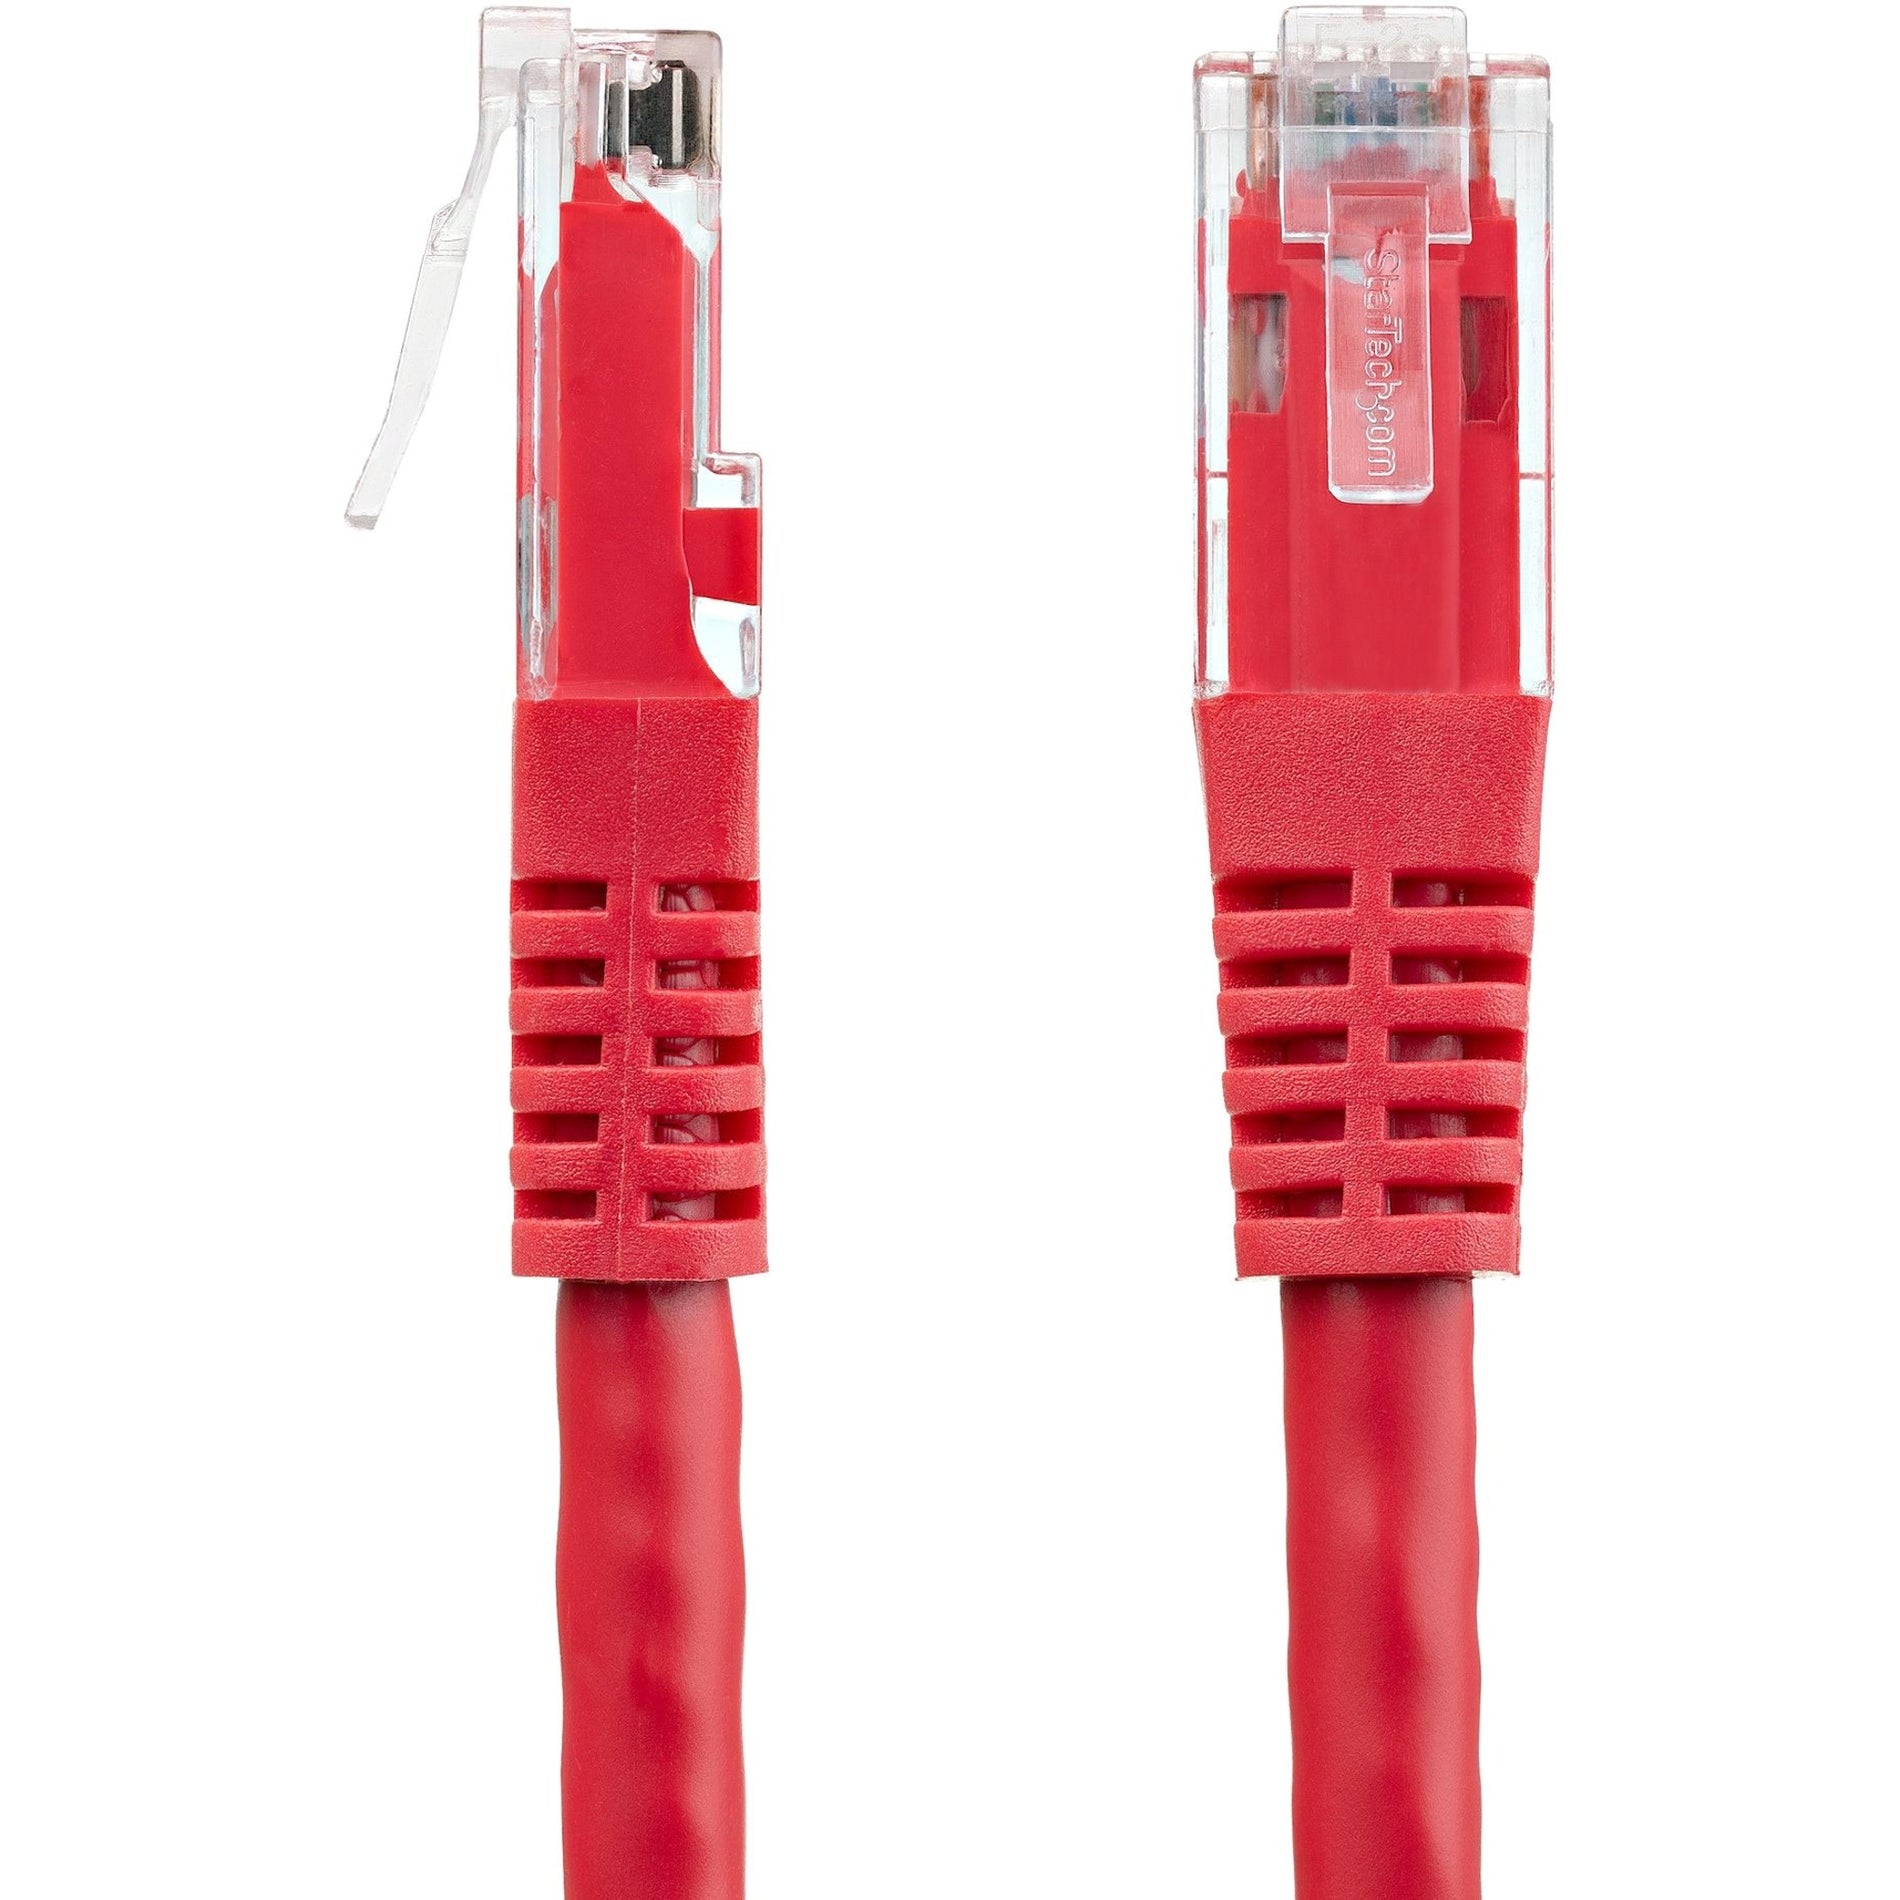 StarTech.com C6PATCH25RD 25ft Red Cat6 UTP Patch Cable ETL Verified, 10 Gbit/s Data Transfer Rate, Strain Relief